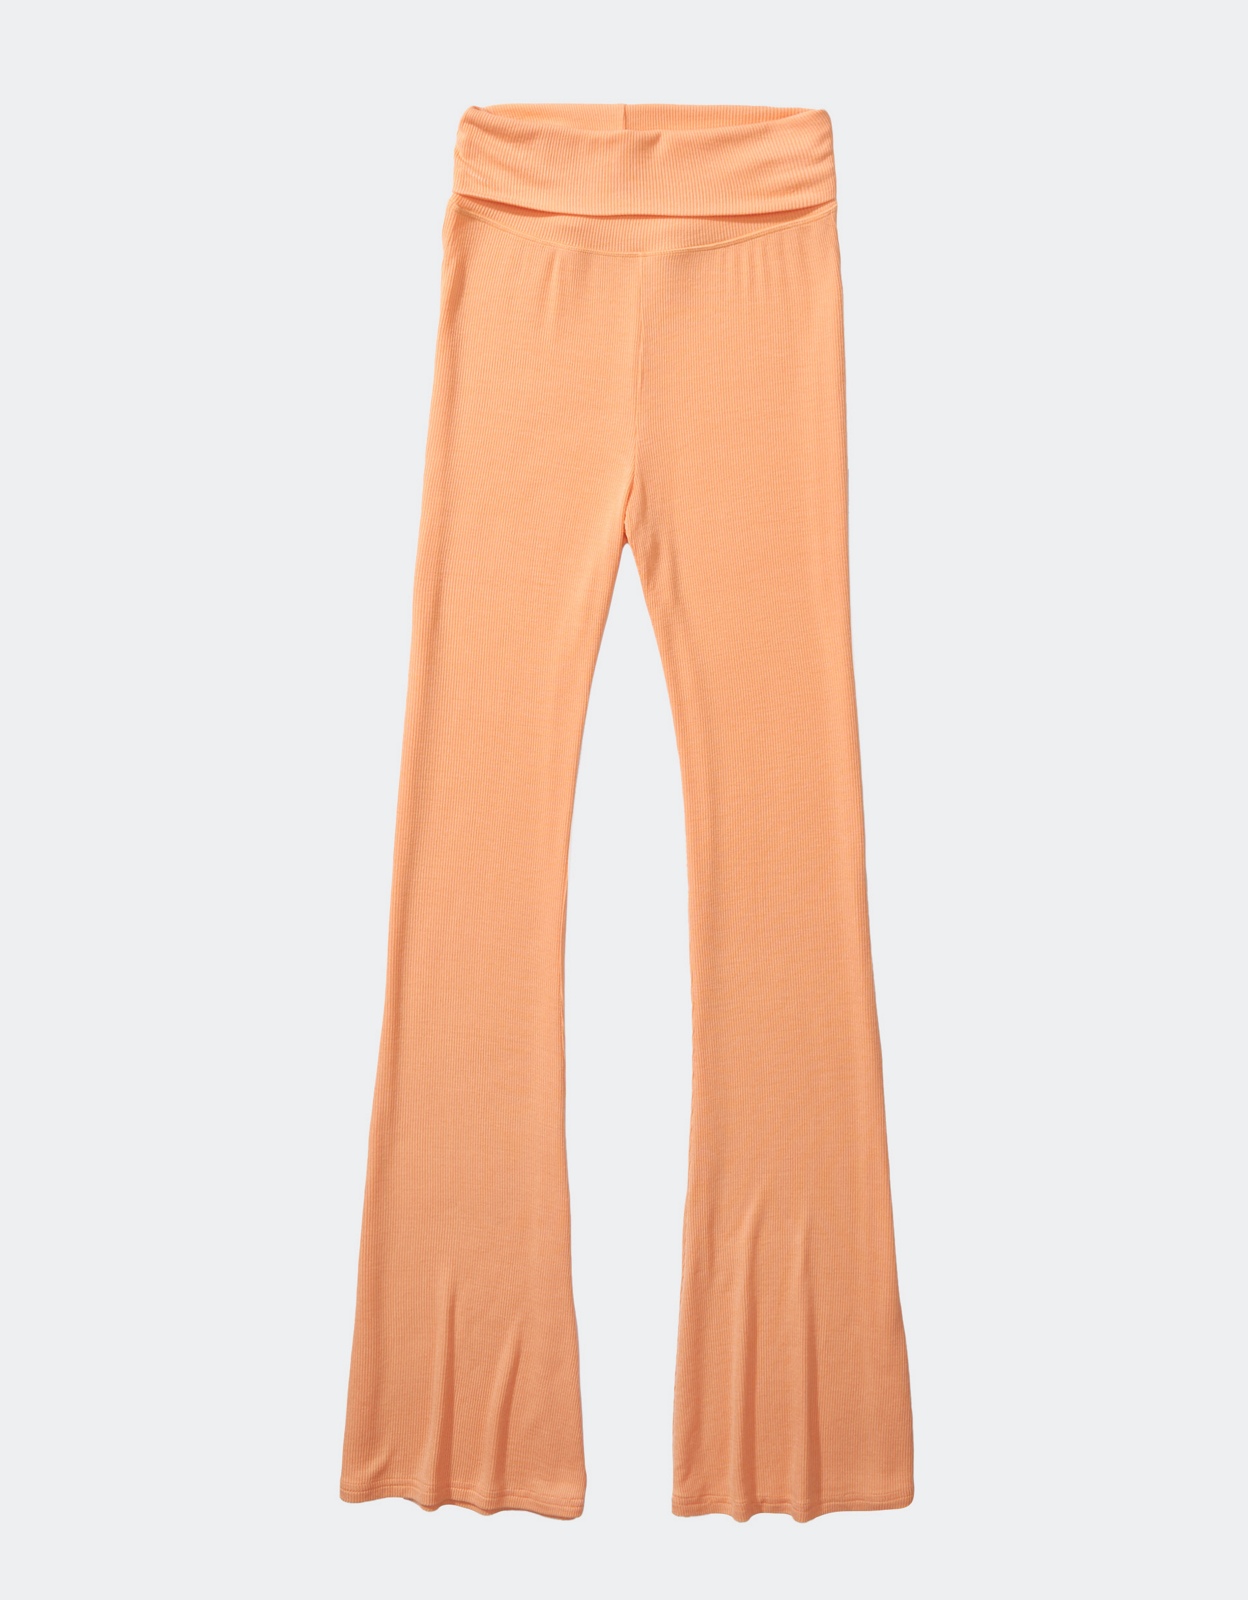 Shop Aerie Real Soft Foldover Flare Pant online